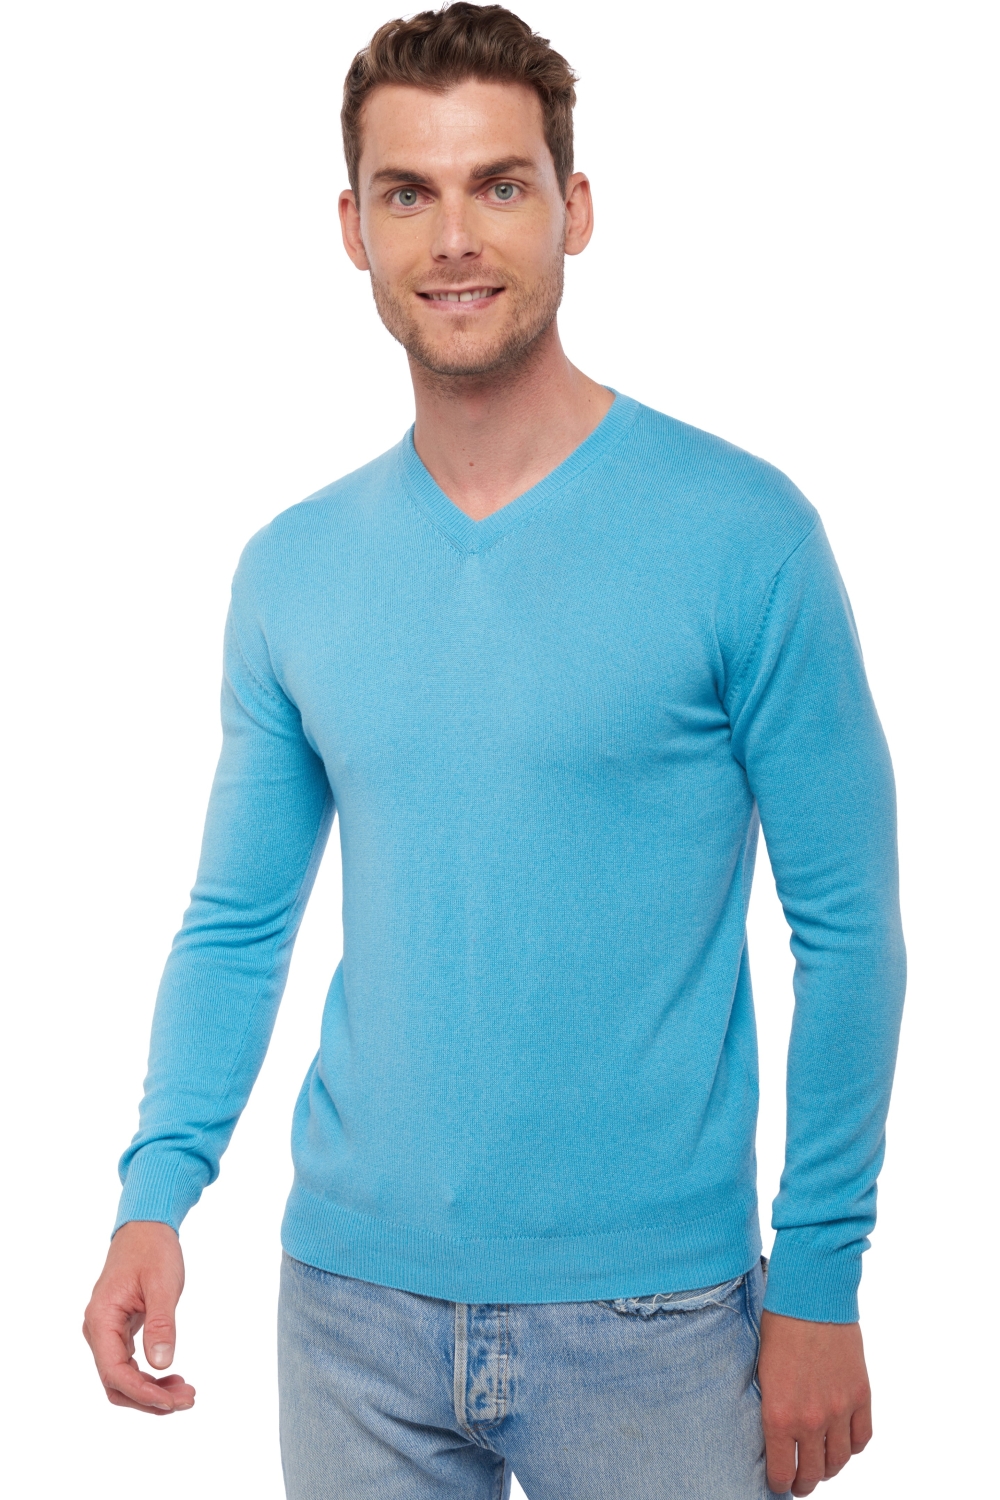 Cashmere men maddox teal blue s